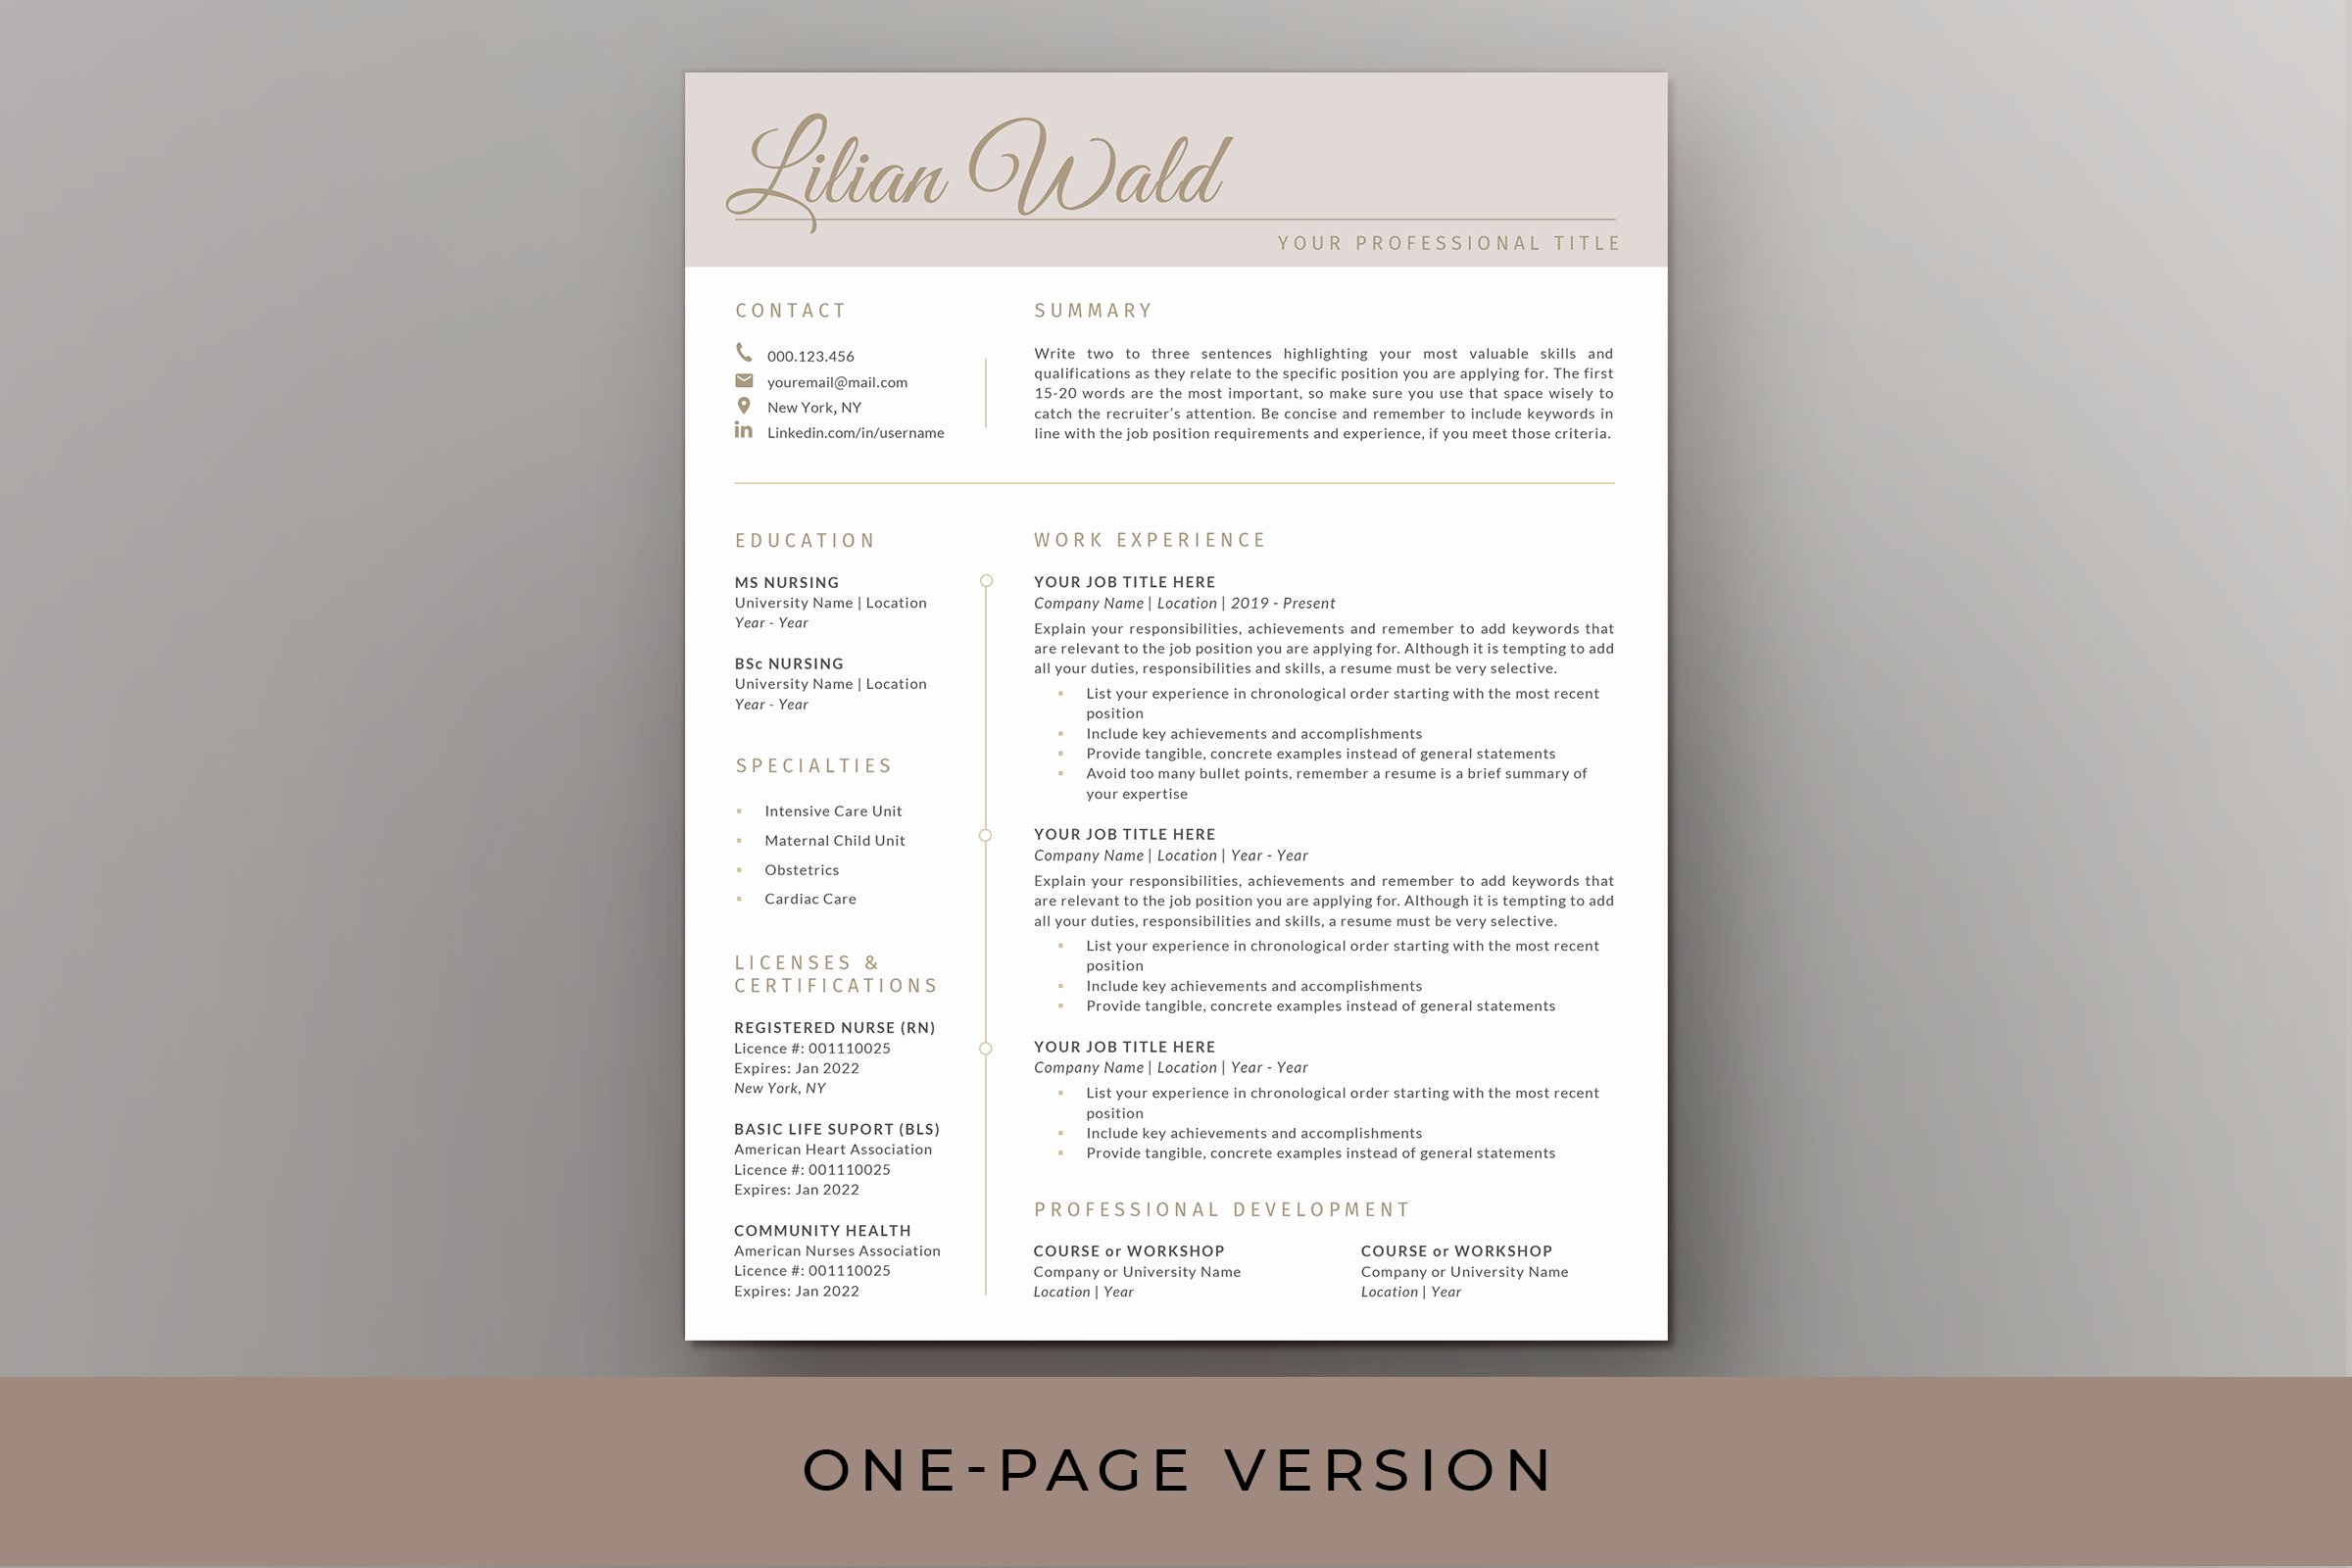 Nurse Resume & Cover Letter - Word preview image.